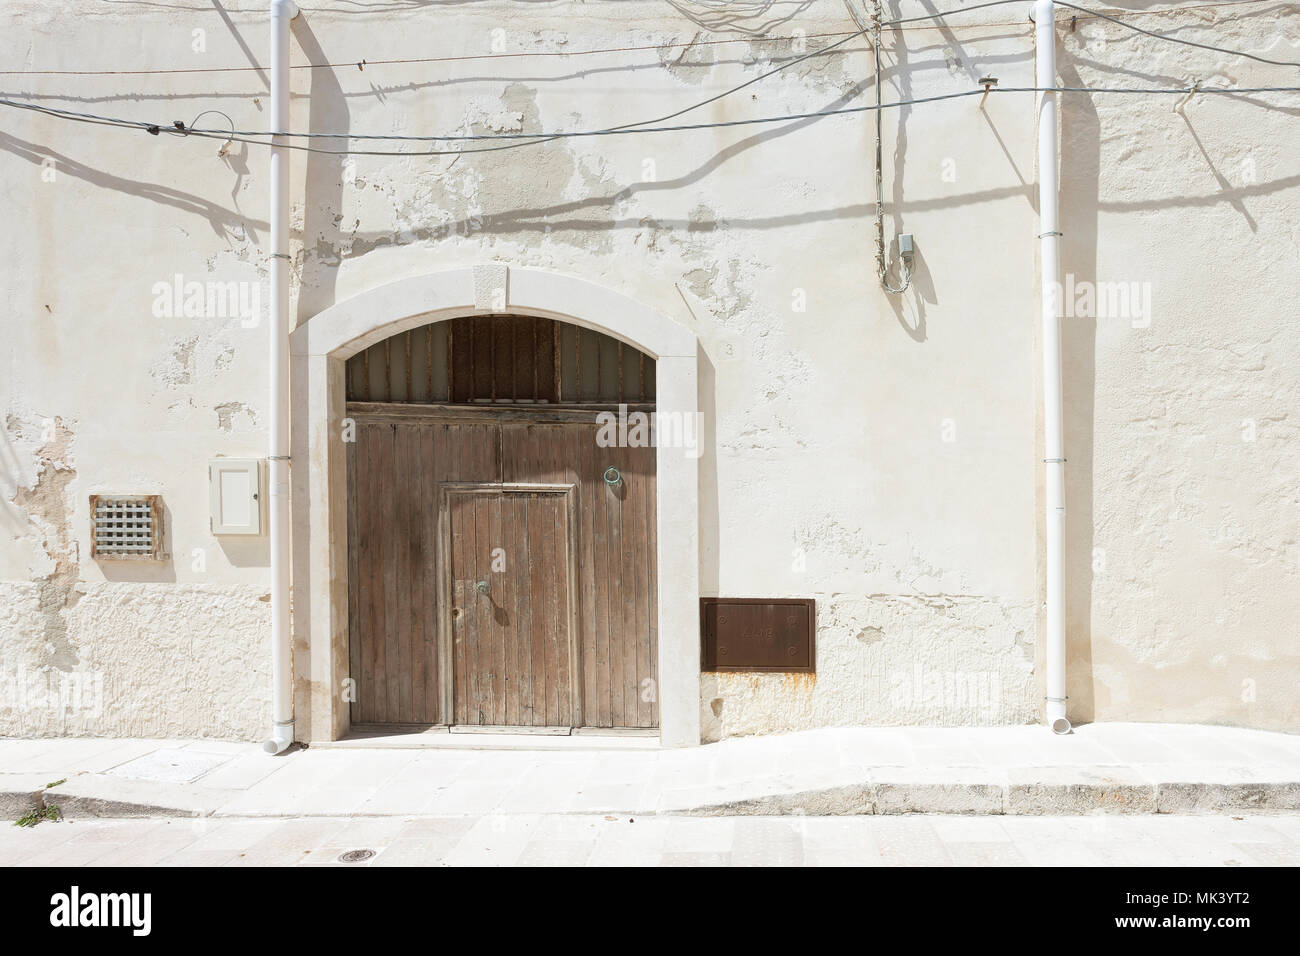 Vieste, Apulia, Italy - A folding gate, two rainwater pipes and some cables Stock Photo